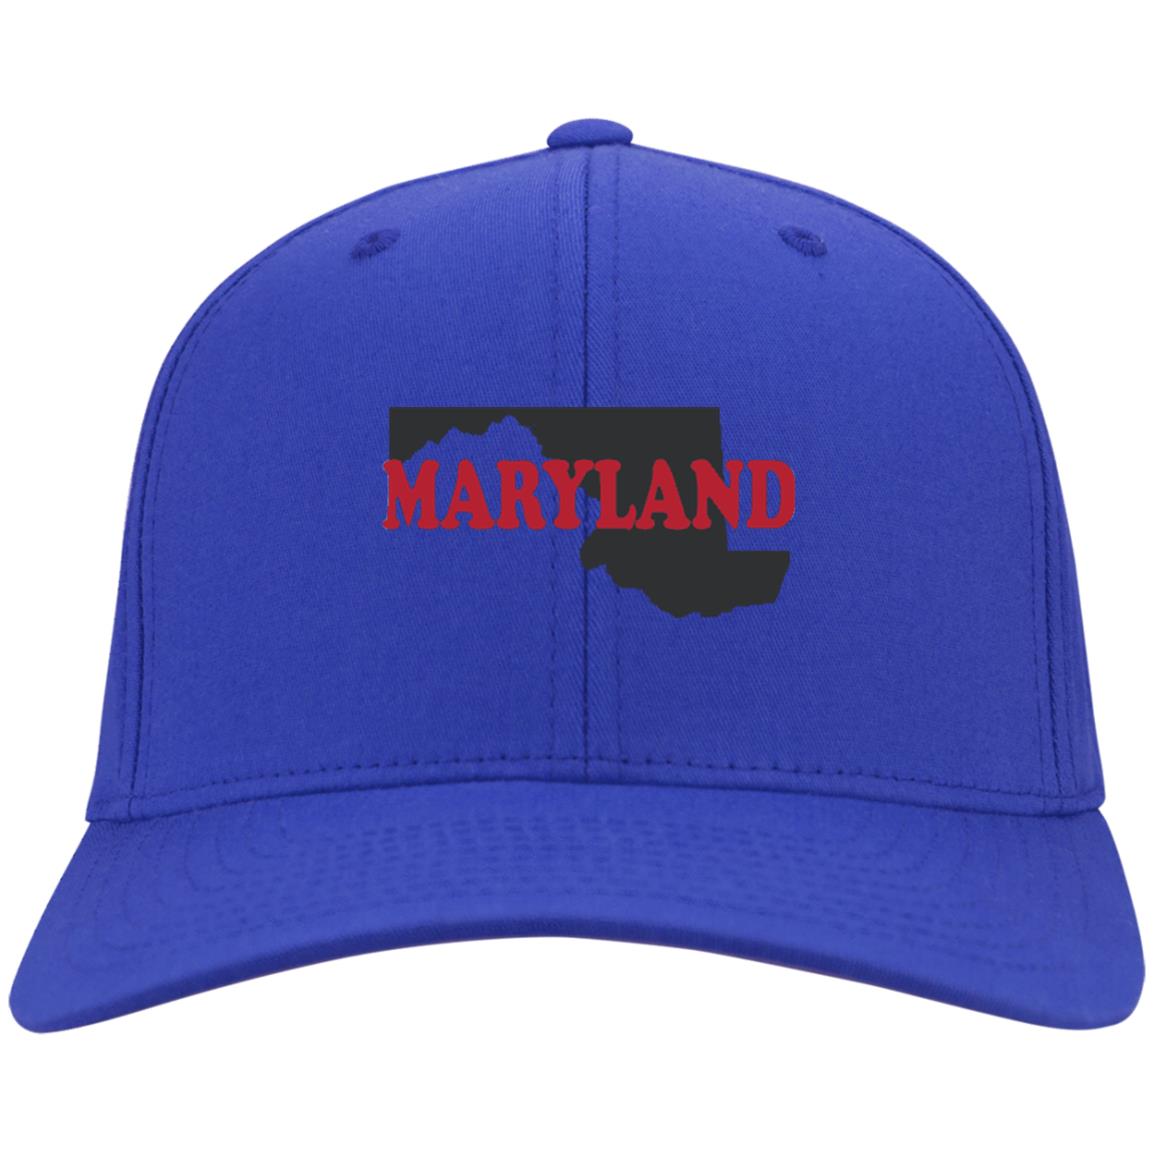 Maryland State Hat